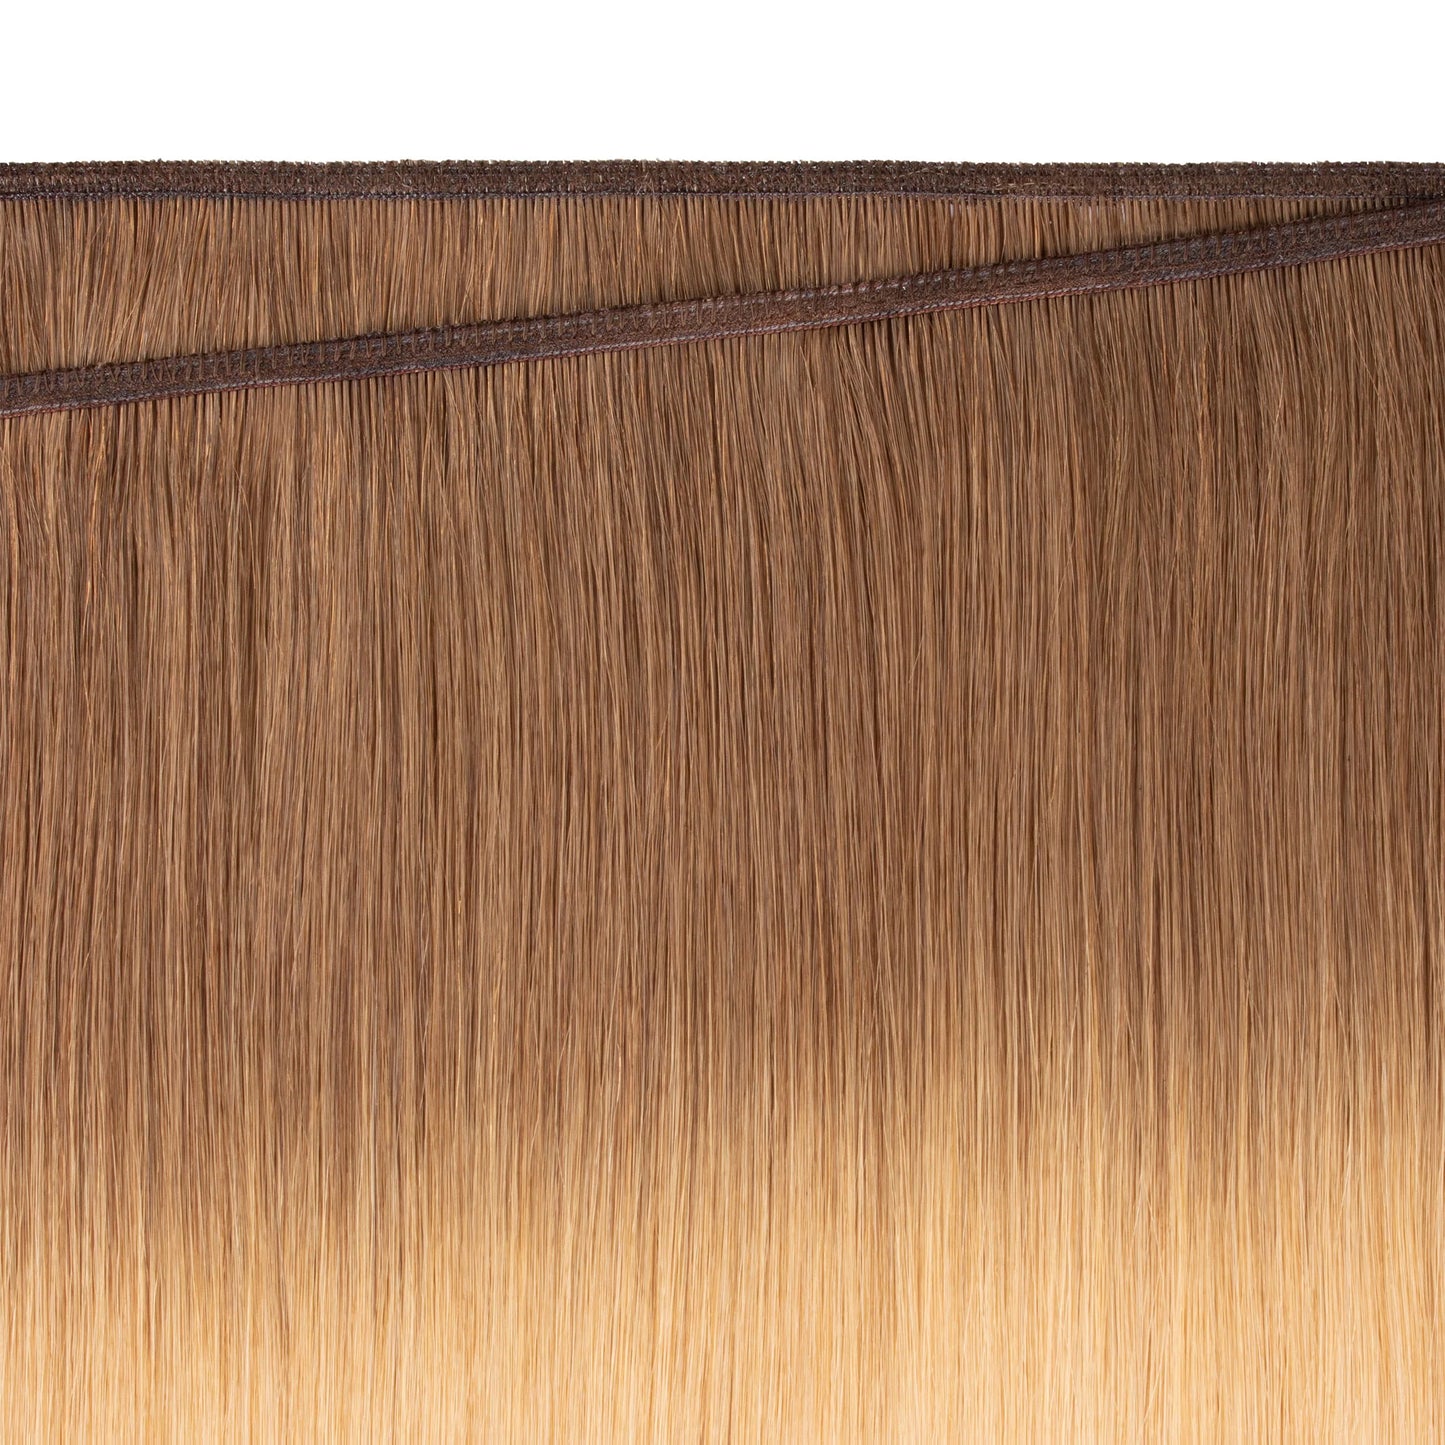 Remi Cachet Elegance Luxury Weft Russian and Mongolian Human Hair - 20 inch